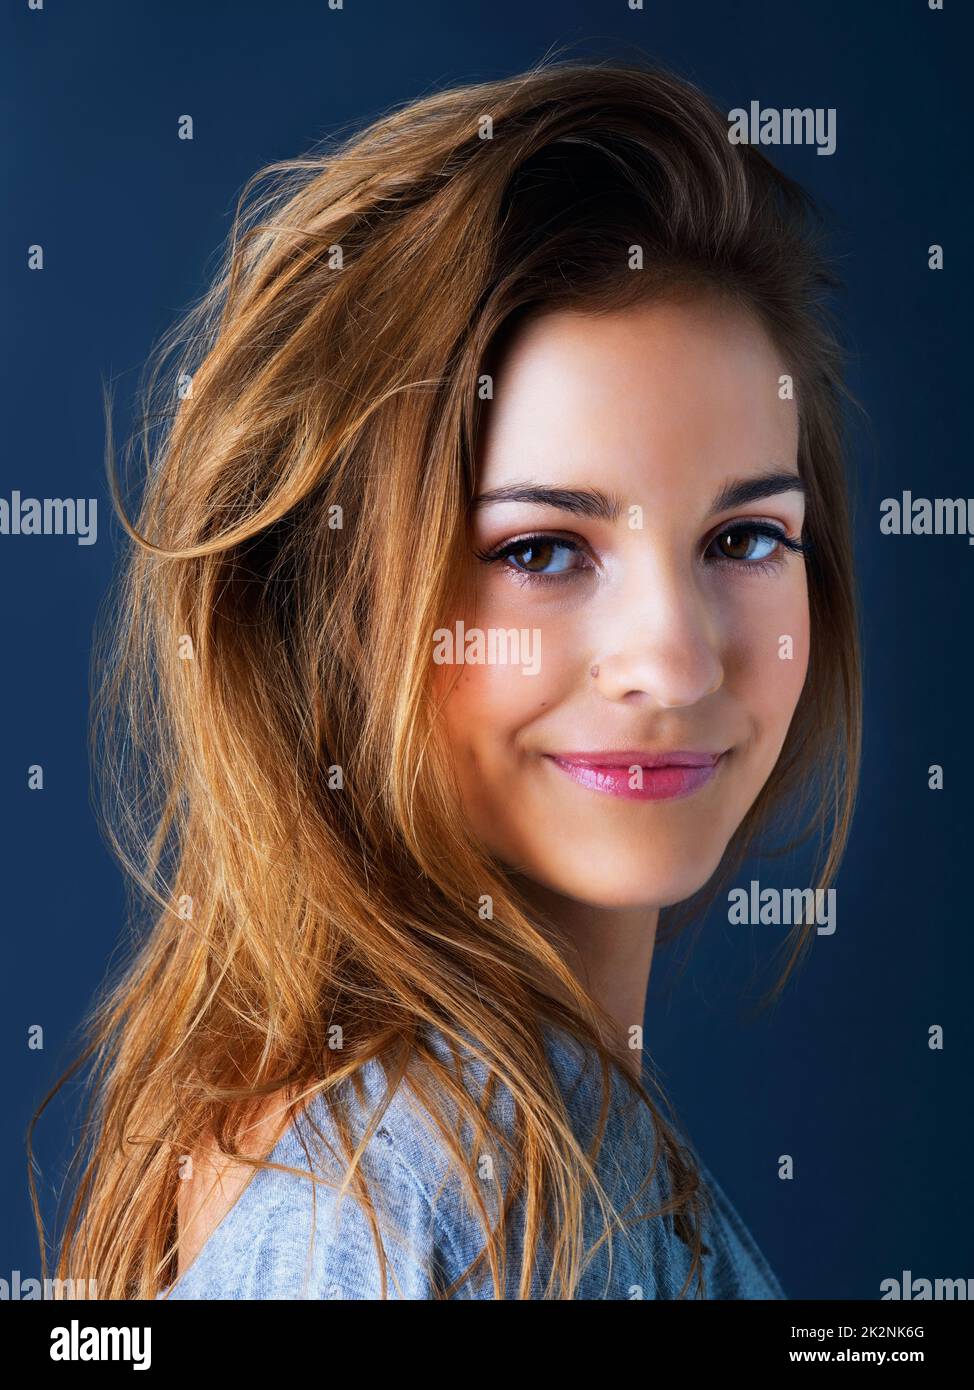 Shes got an easygoing spirit. Studio portrait of a cute teenage girl smiling and posing against a dark background. Stock Photo